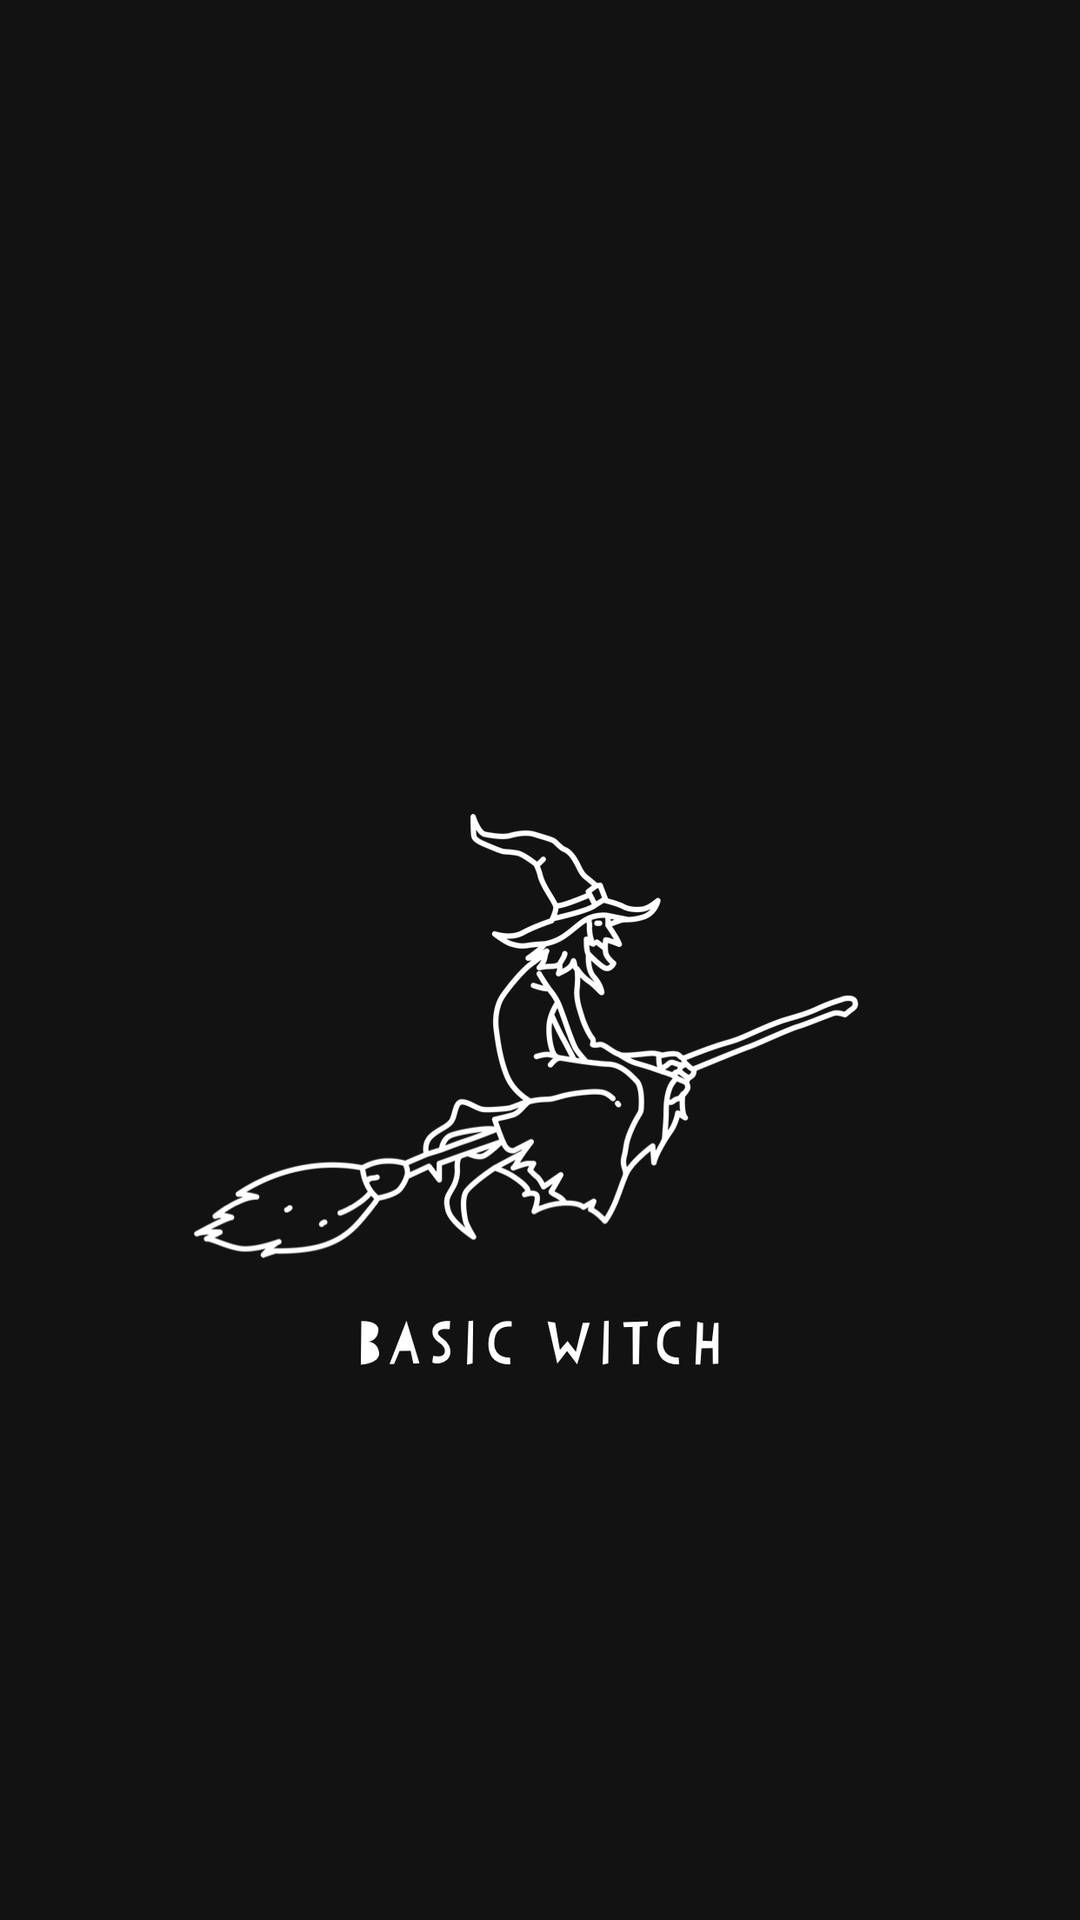 Free Witchy Aesthetic Wallpaper Downloads, Witchy Aesthetic Wallpaper for FREE